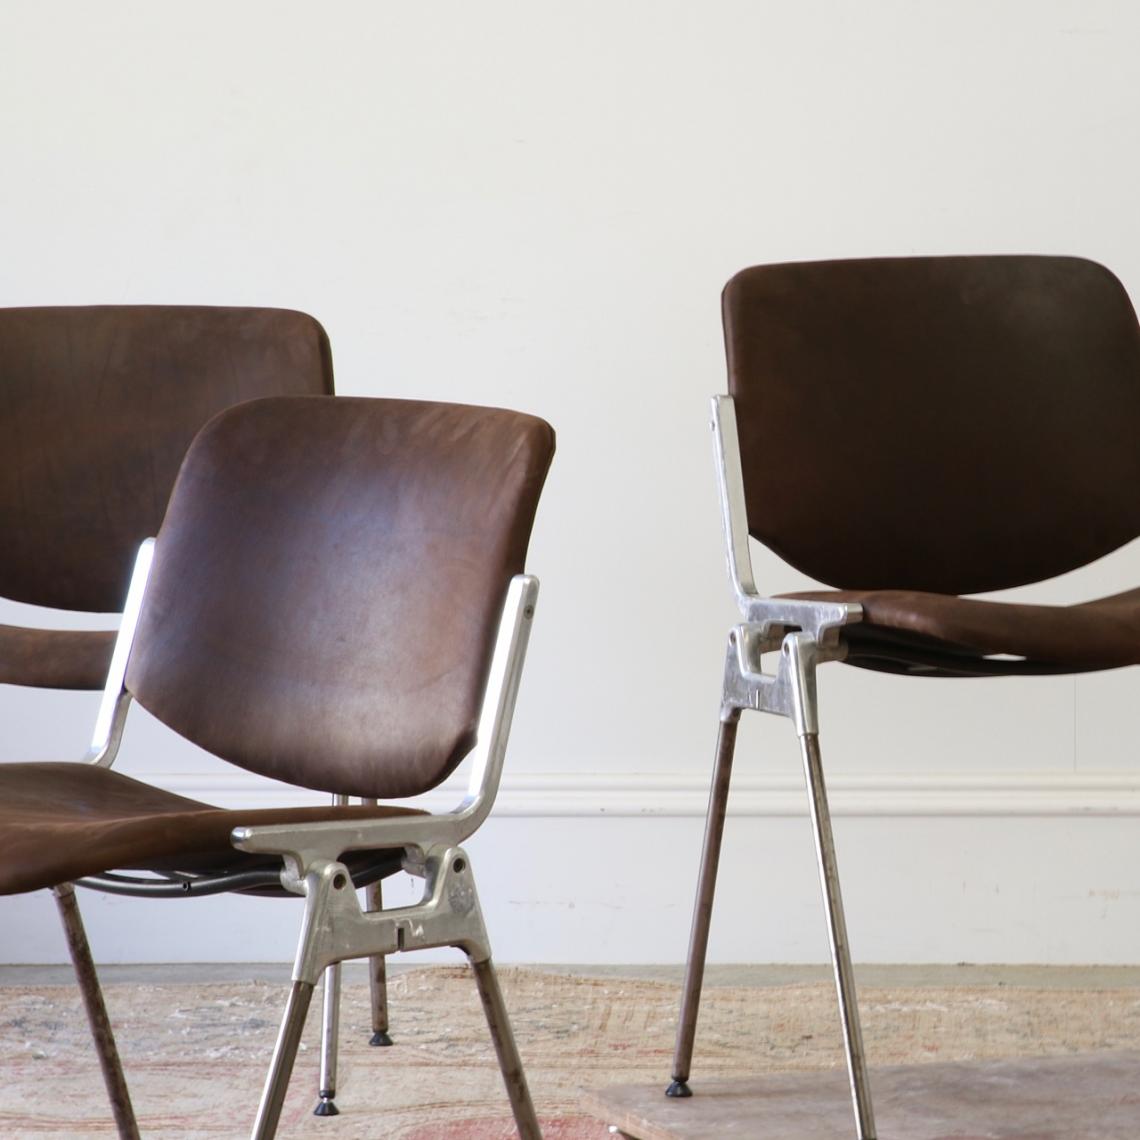 Castelli Chairs // Molasses leather